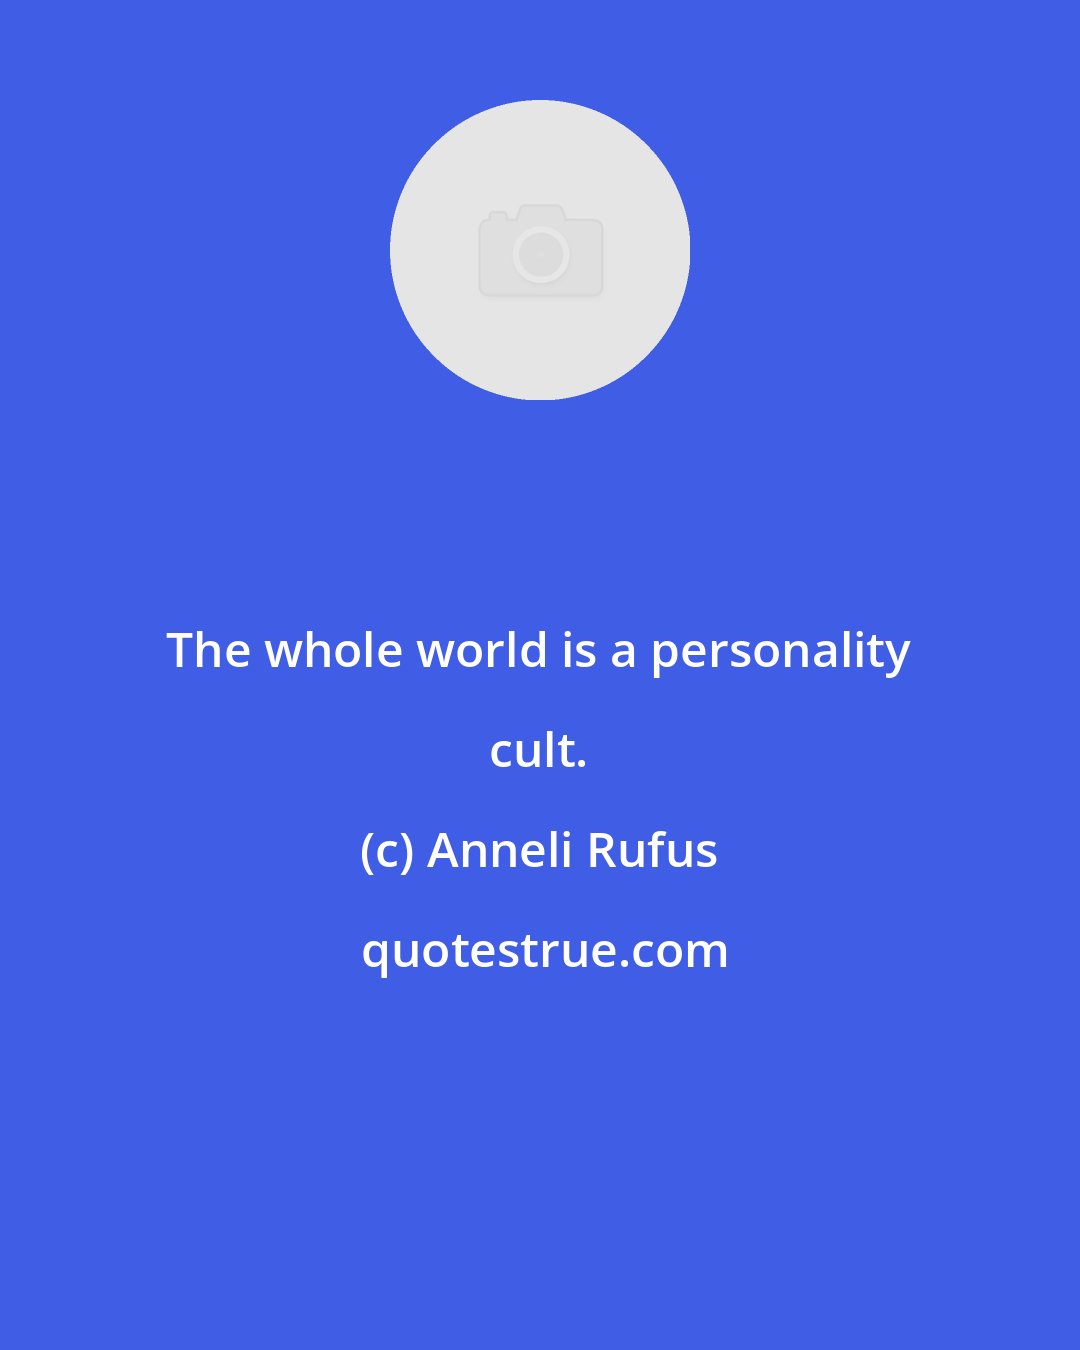 Anneli Rufus: The whole world is a personality cult.